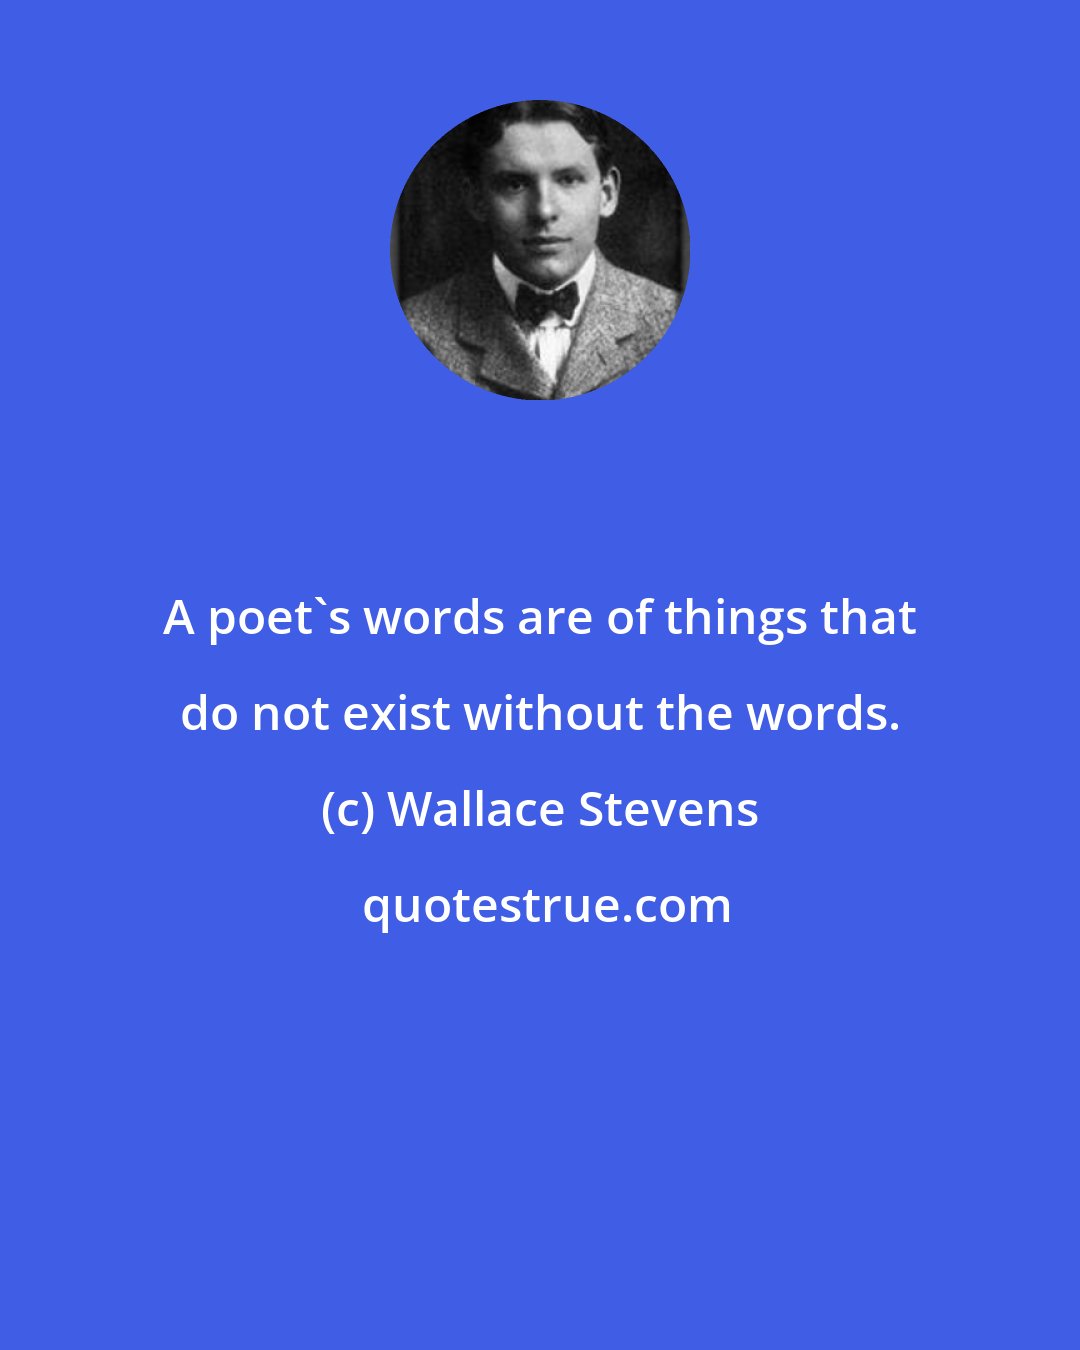 Wallace Stevens: A poet's words are of things that do not exist without the words.